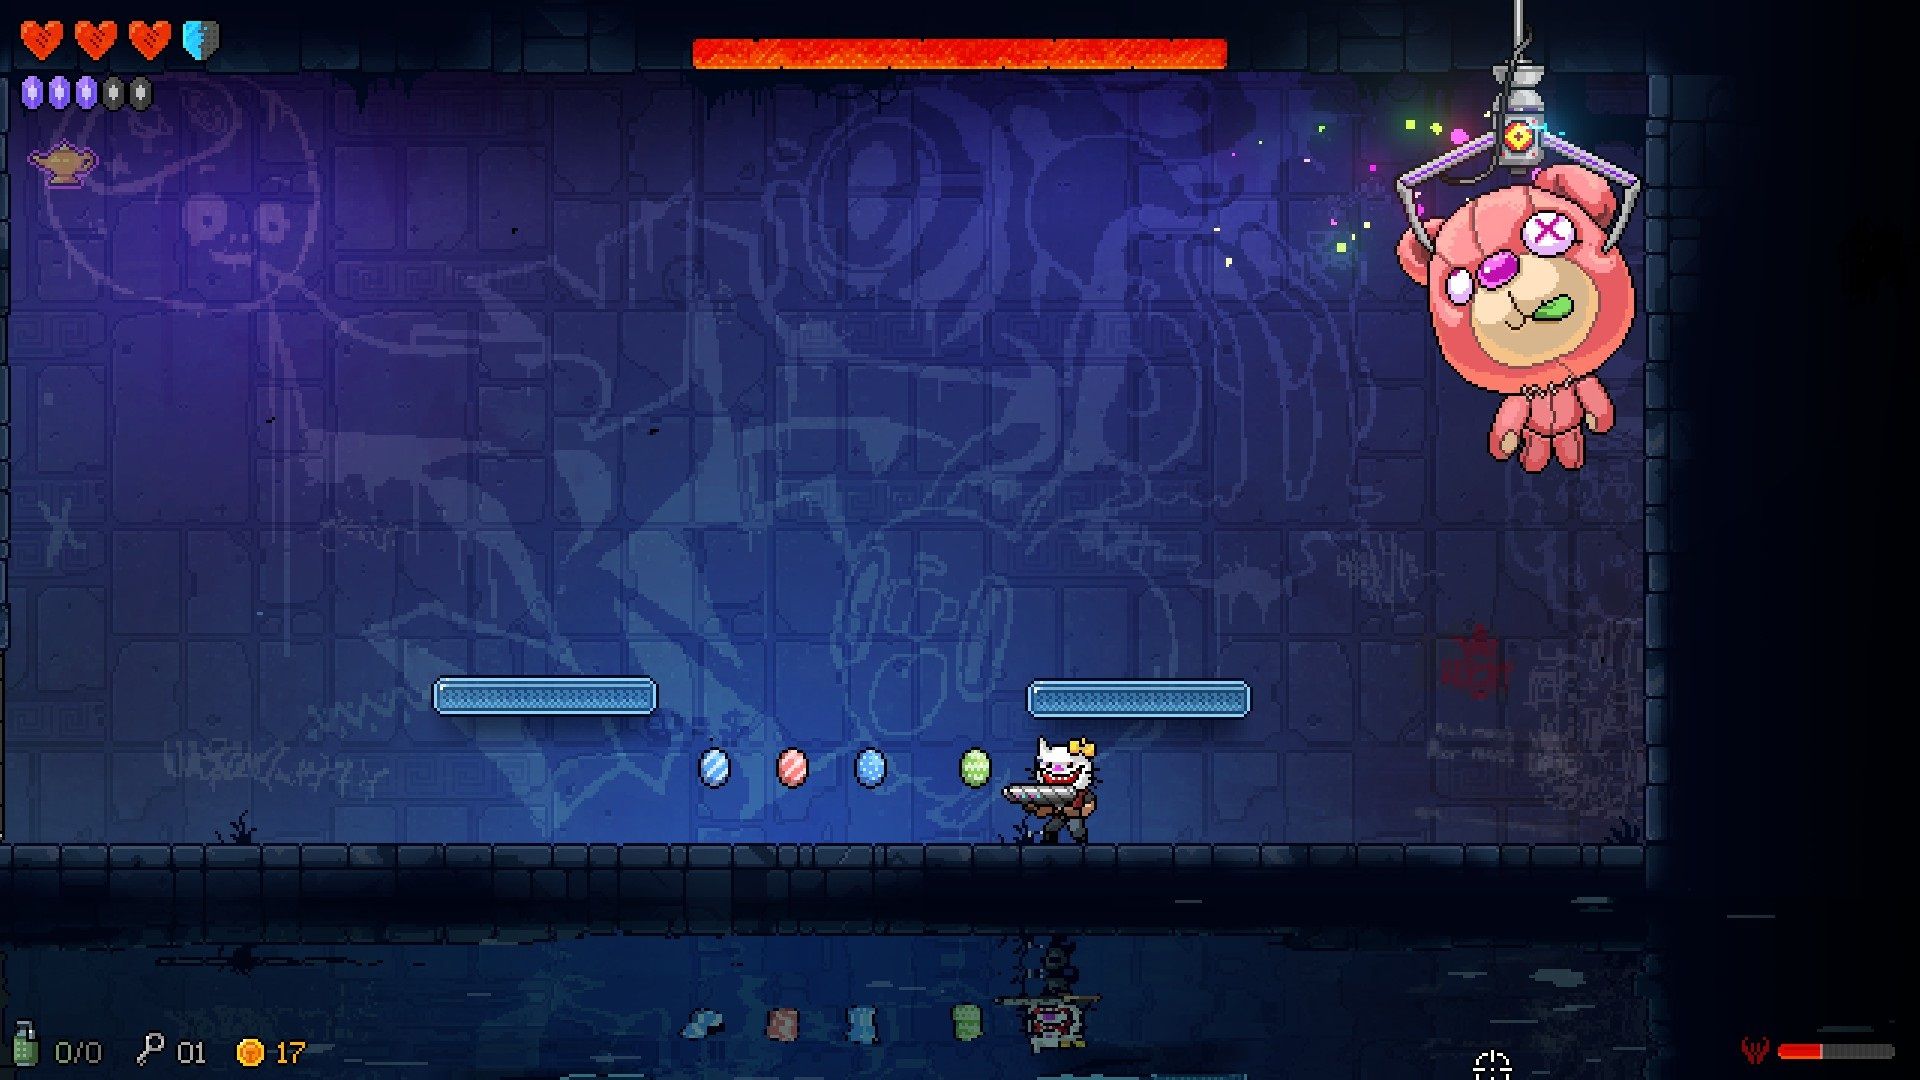 The player faces off against a claw machine boss in Neon Abyss